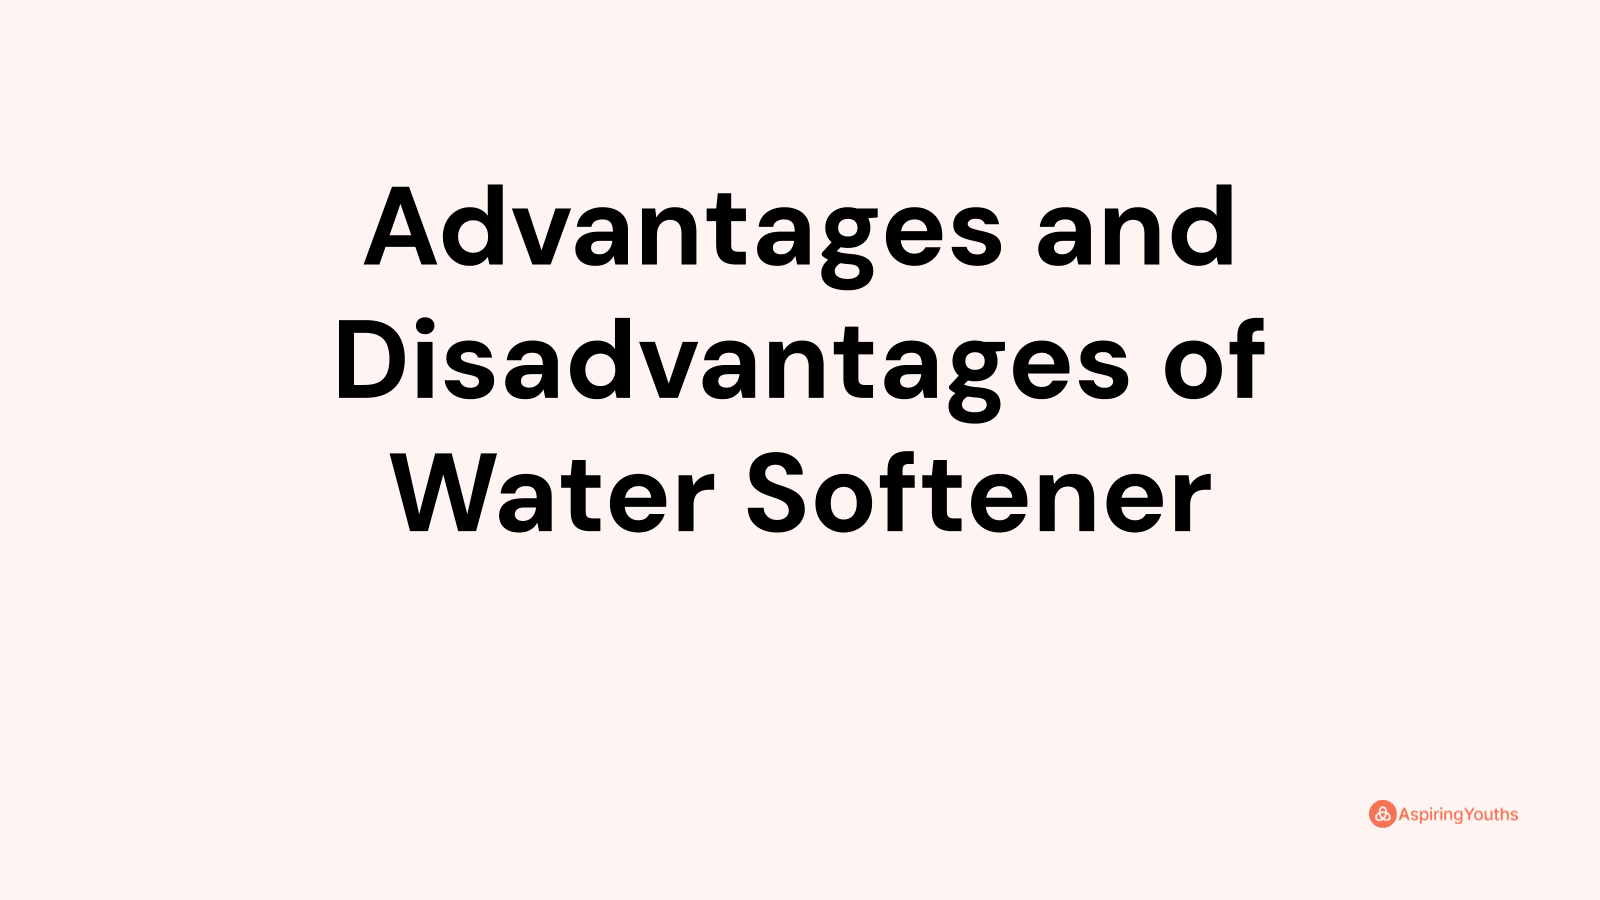 Advantages and disadvantages of Water Softener